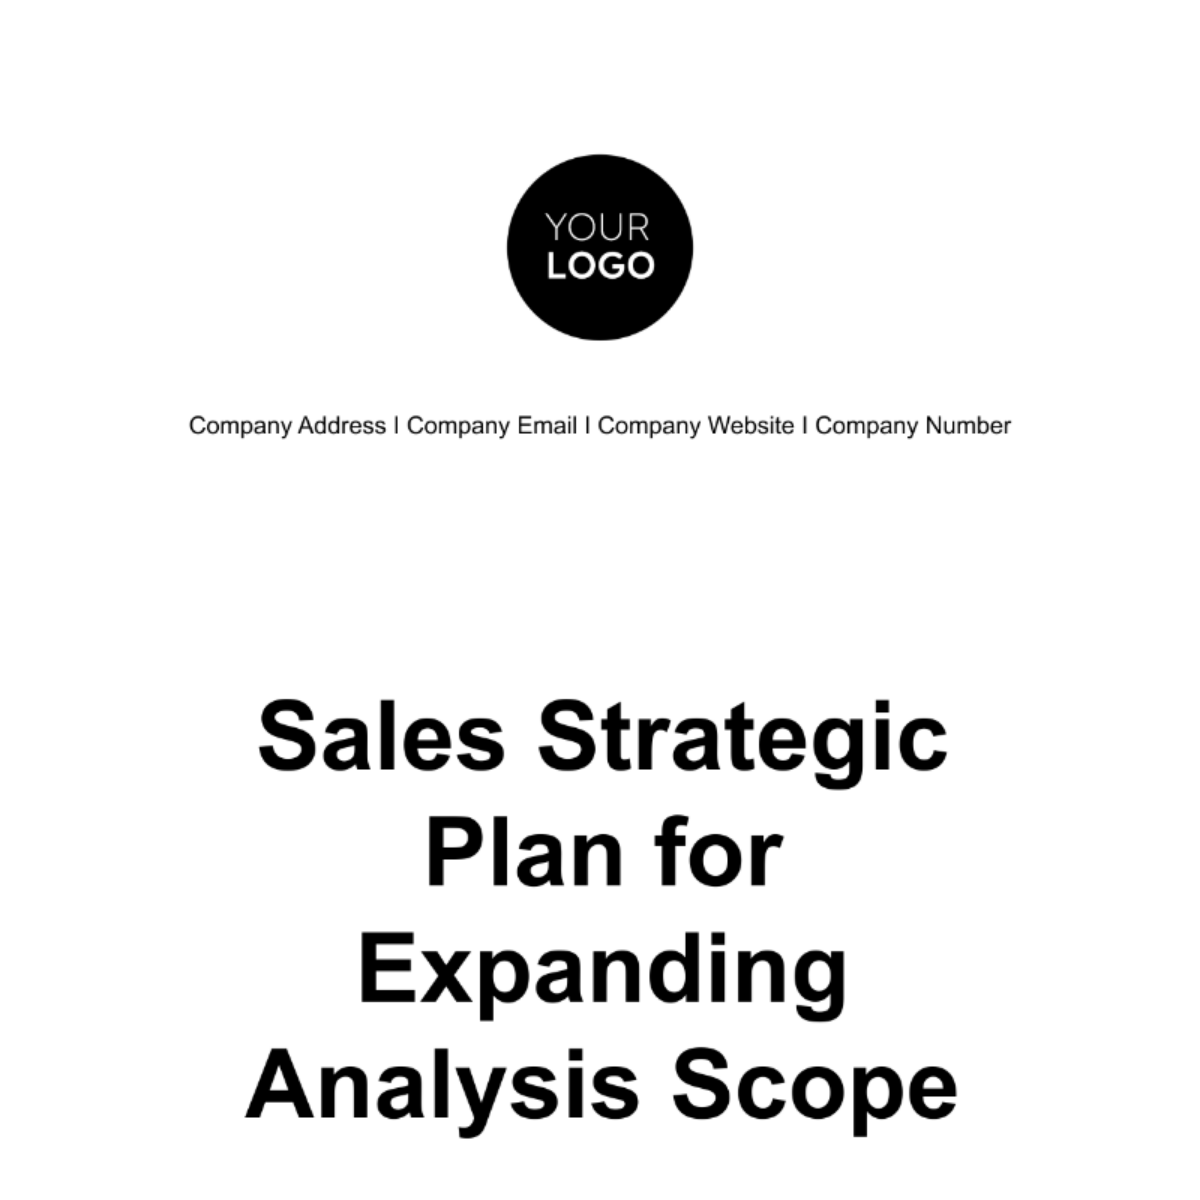 Free Sales Strategic Plan for Expanding Analysis Scope Template